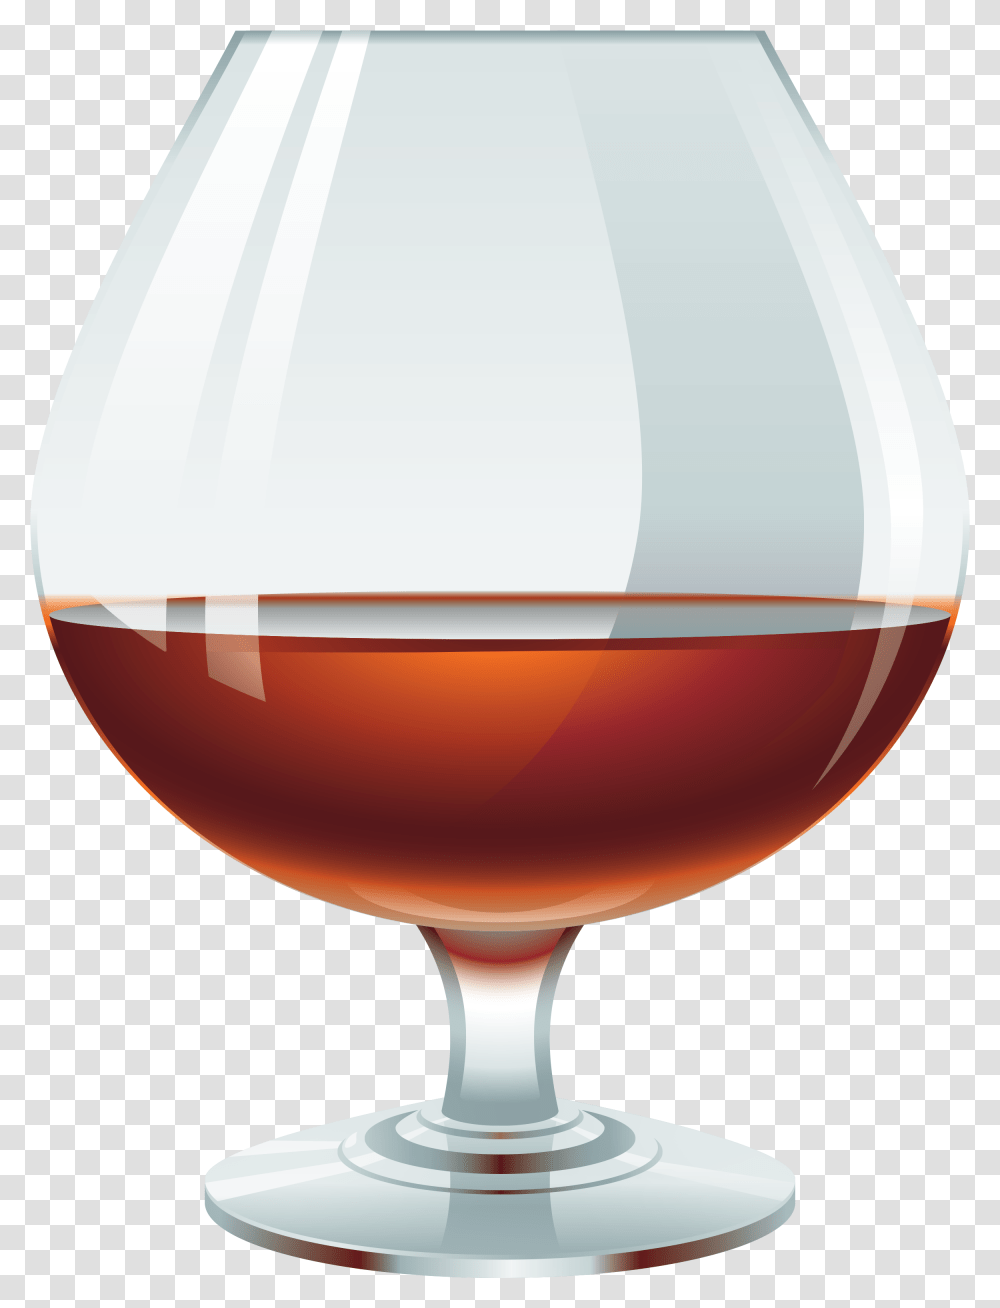 Brandy Glass Clipart Glass Of Brandy, Lamp, Wine Glass, Alcohol, Beverage Transparent Png